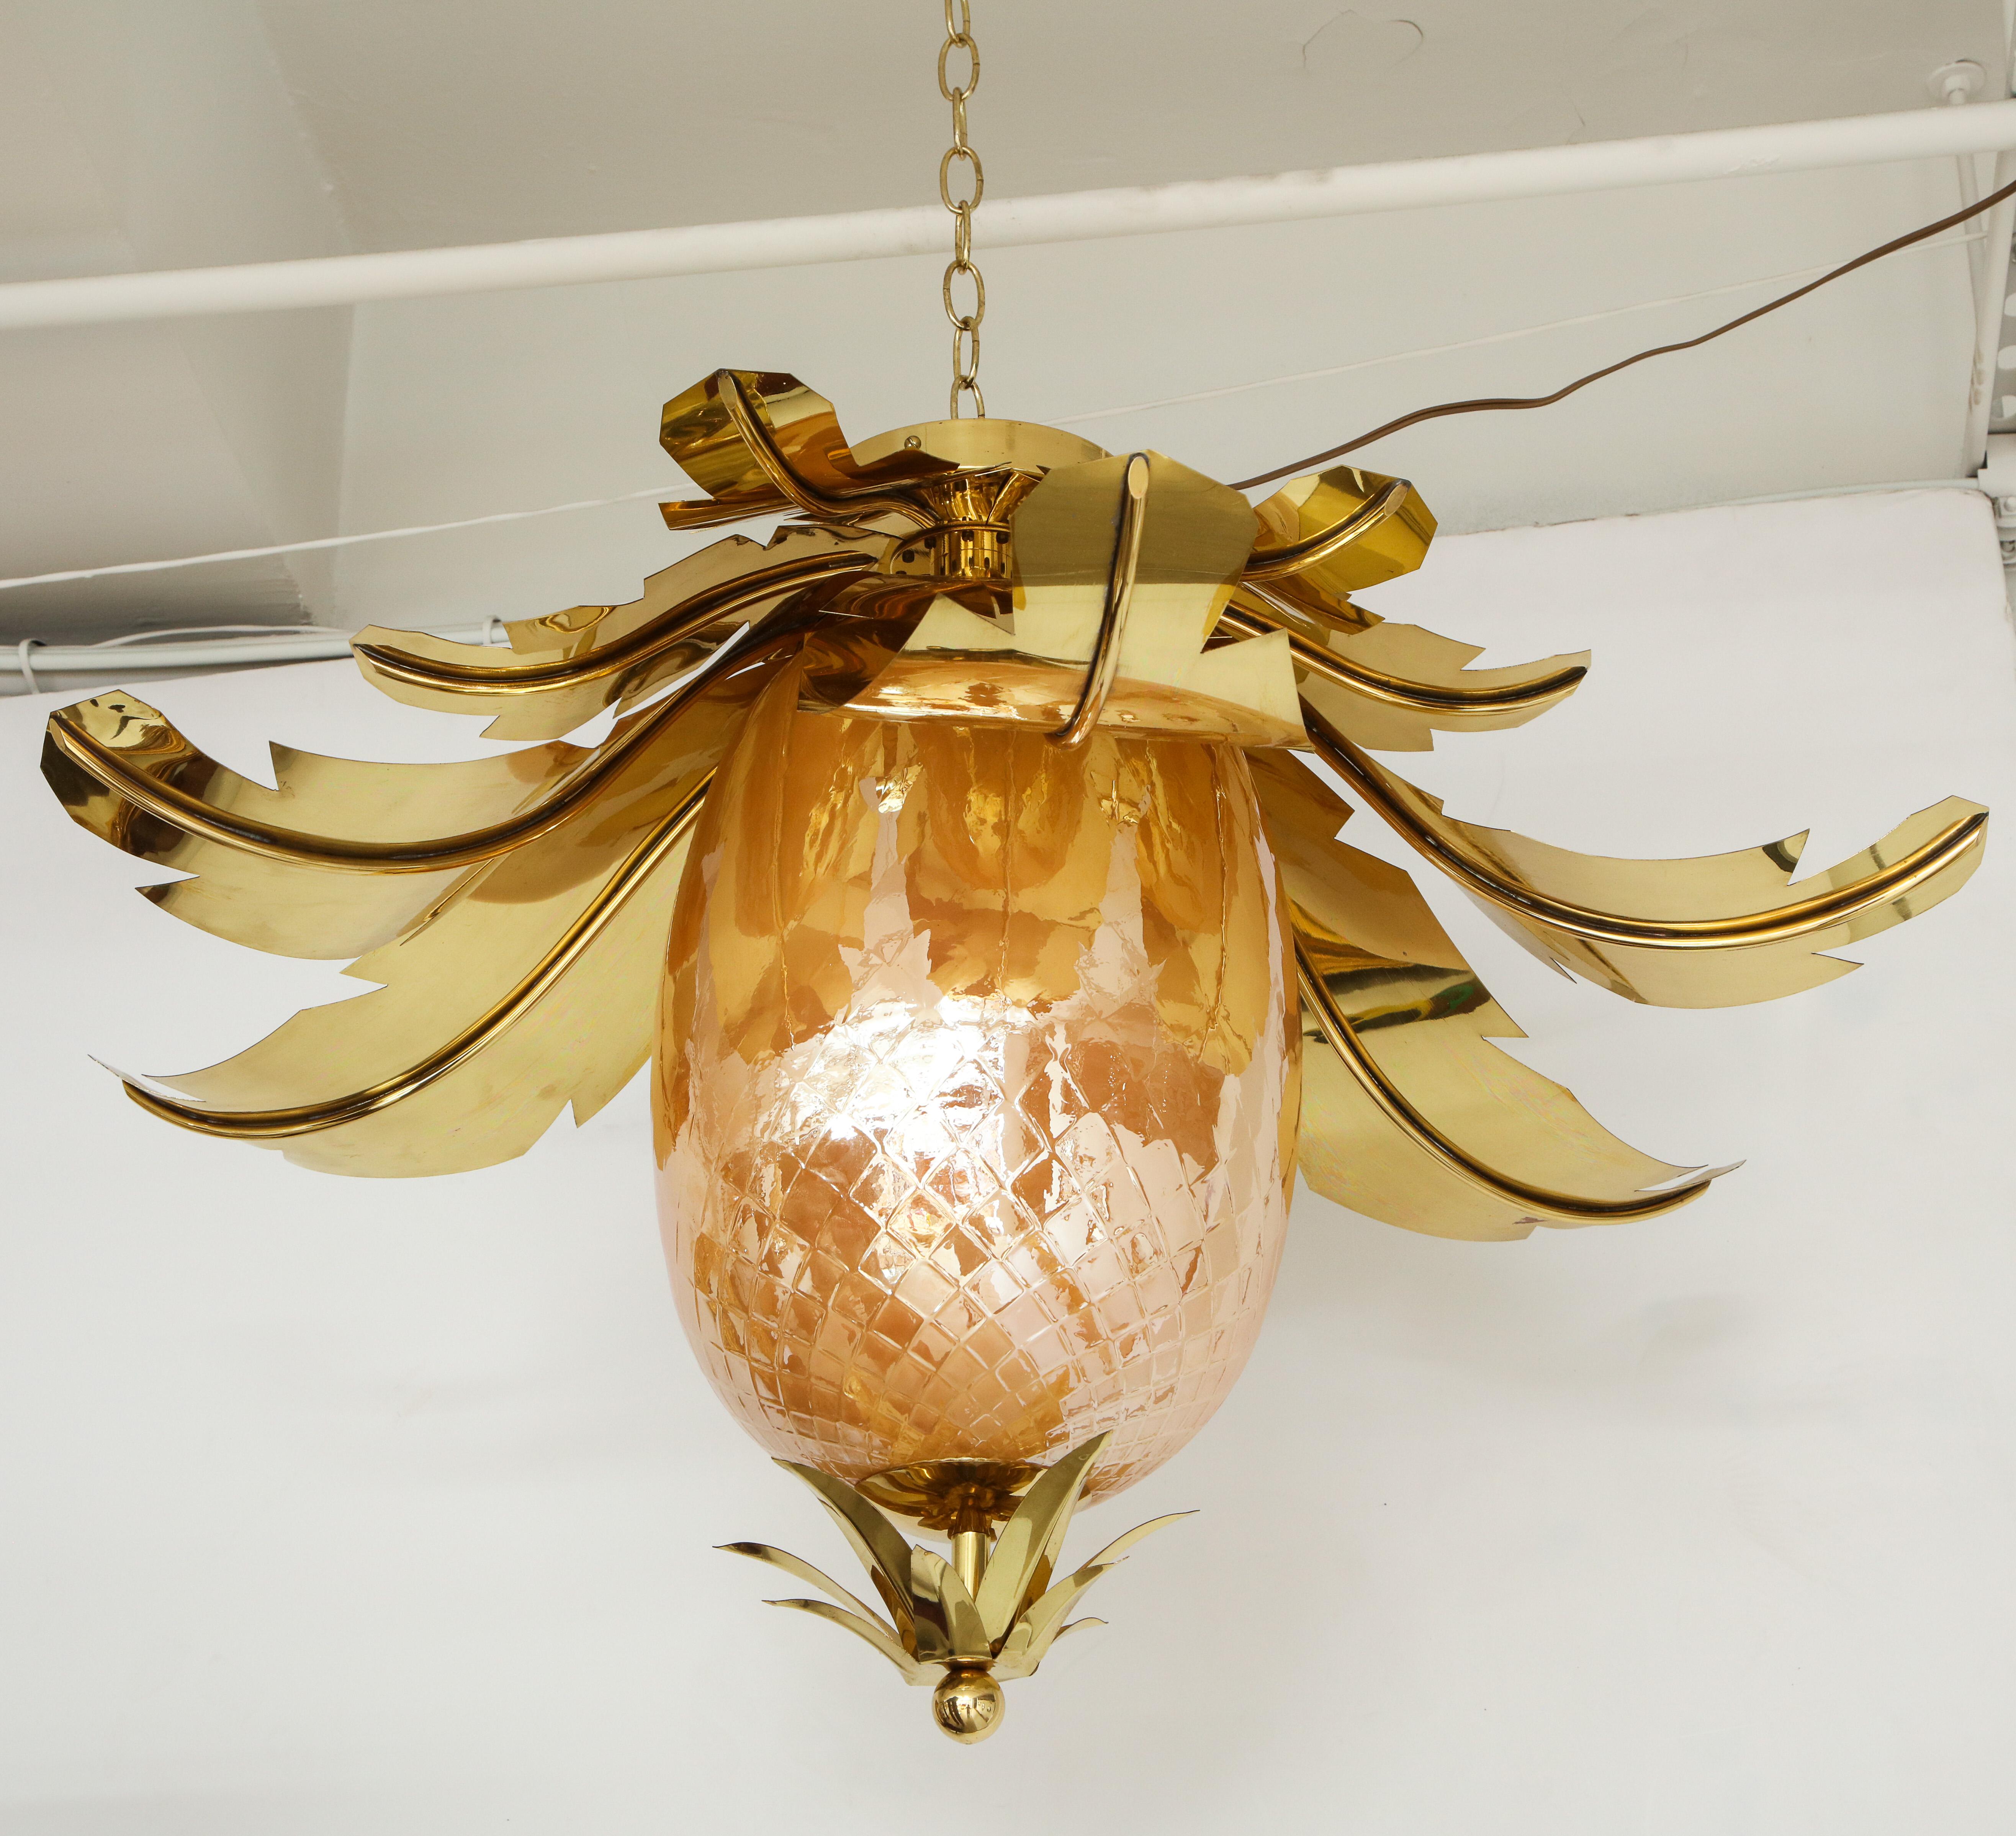 Pair of Venetian peach glass and brass leaves pendant chandeliers attributed to Veronese.